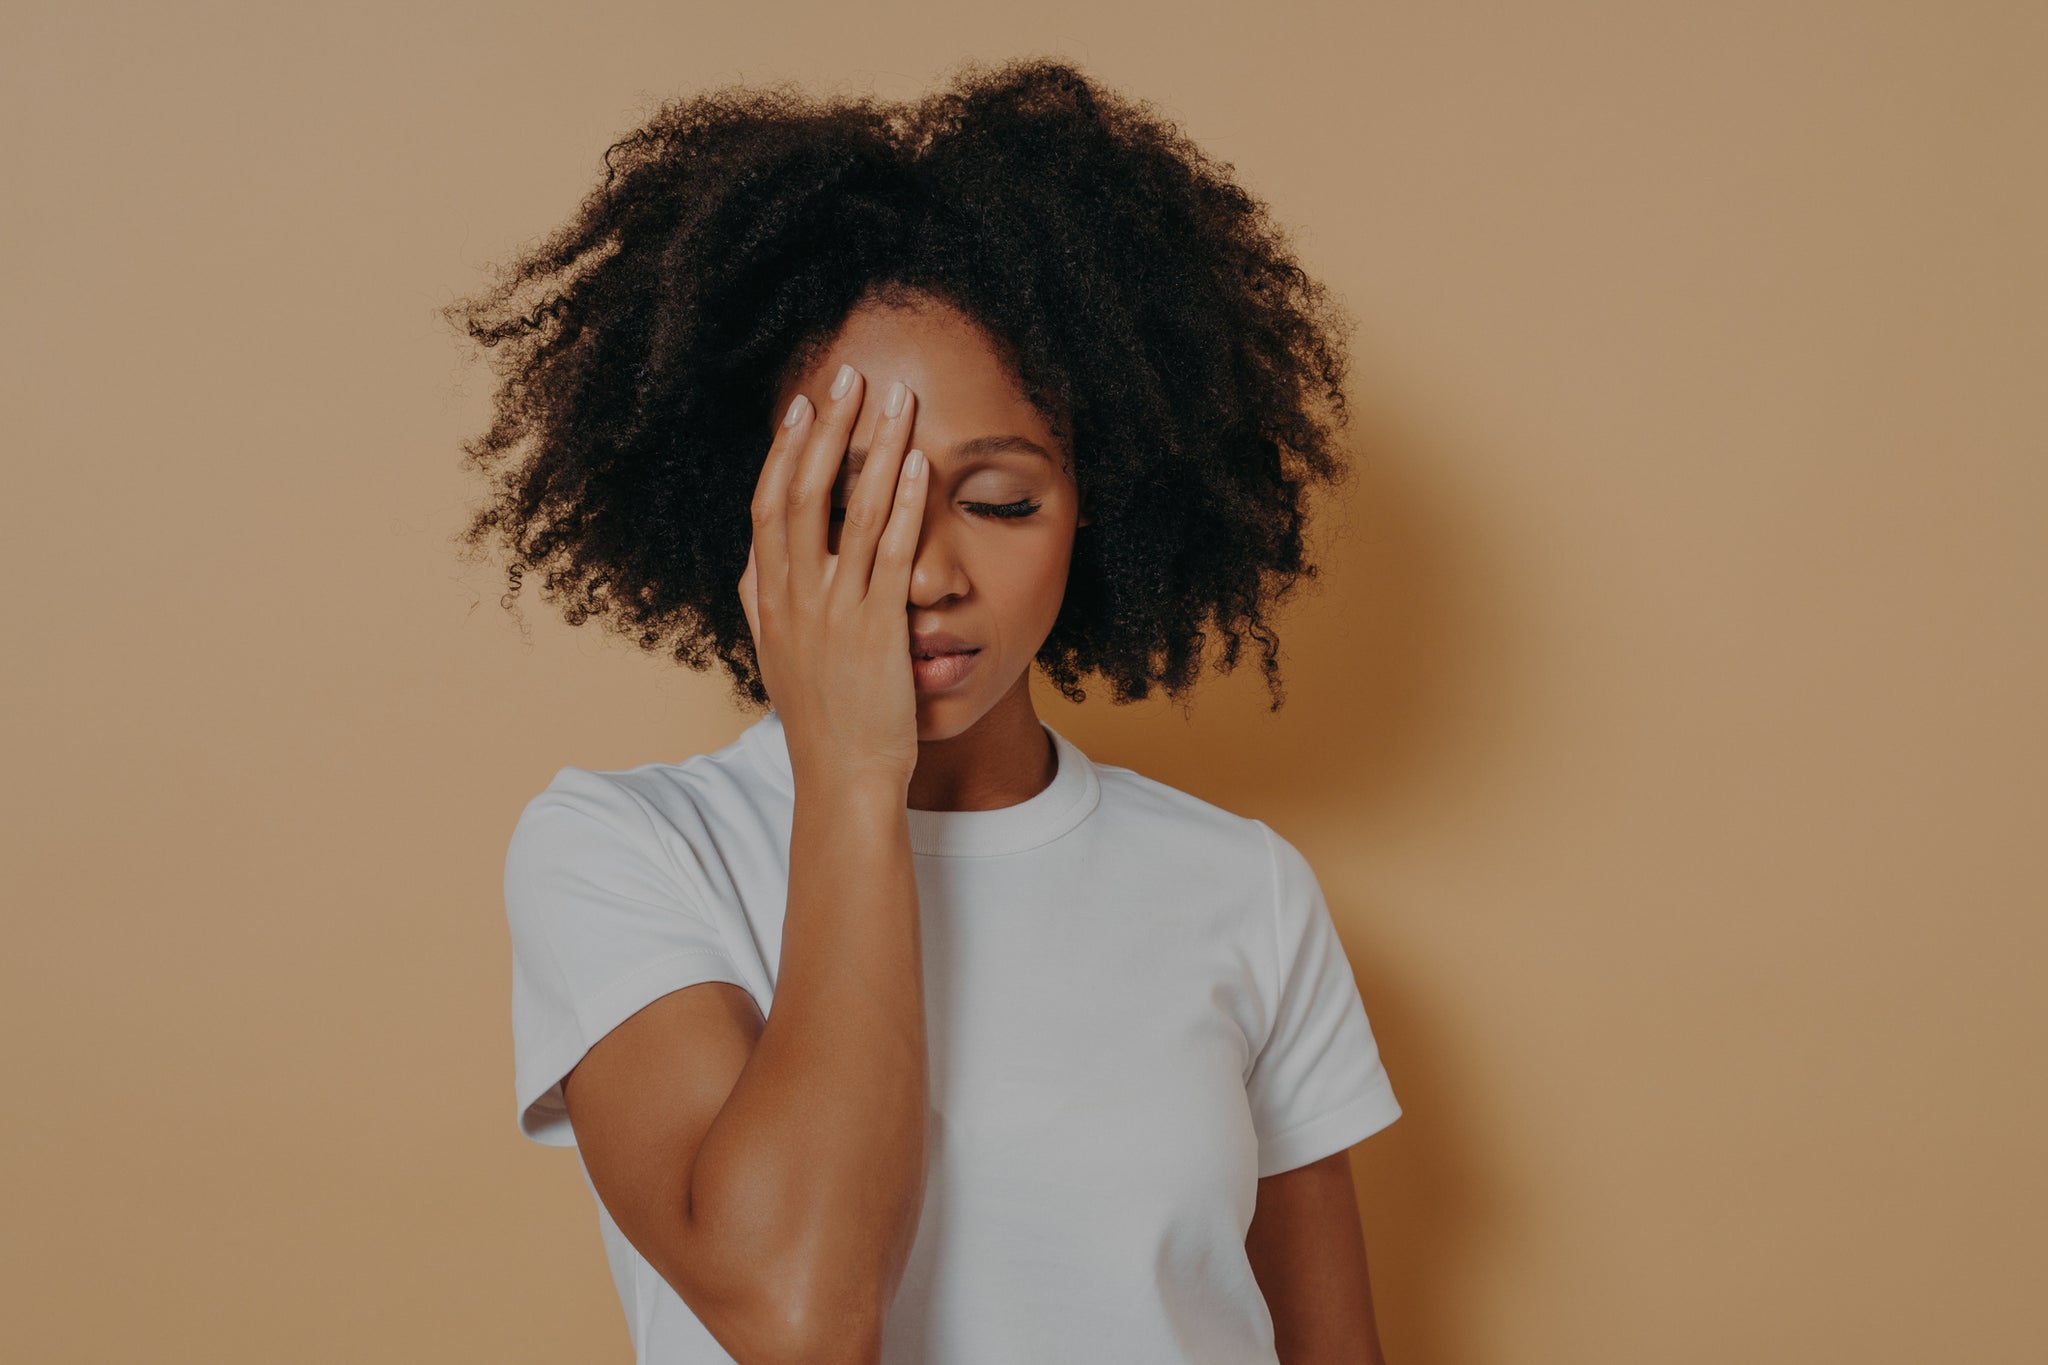 Is Stress Causing Your Hair Loss?